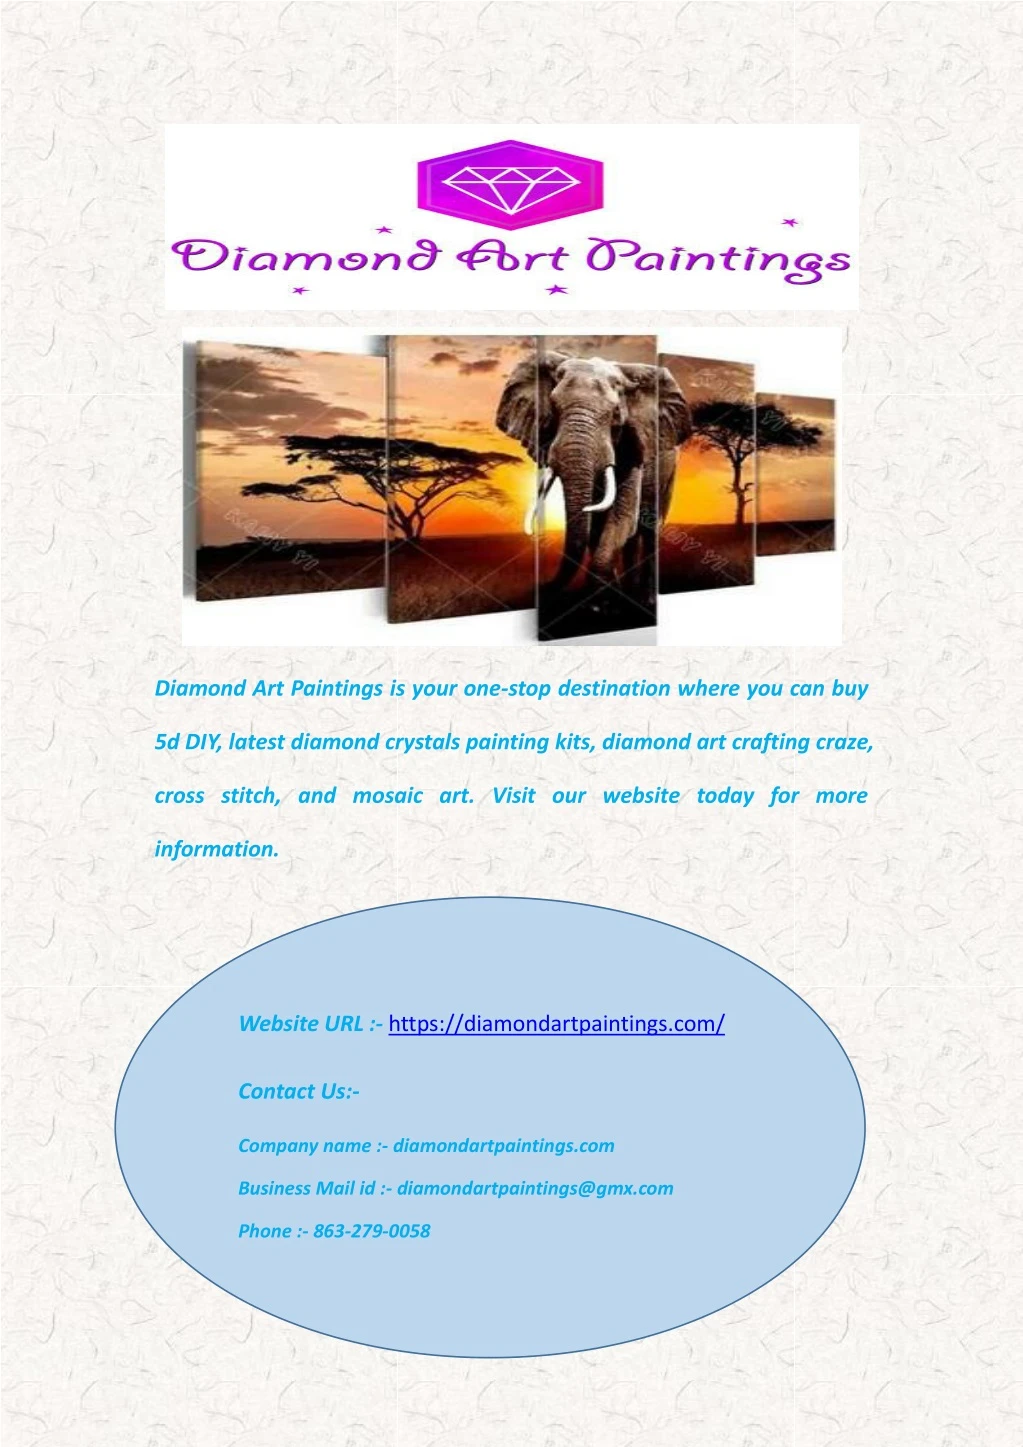 diamond art paintings is your one stop